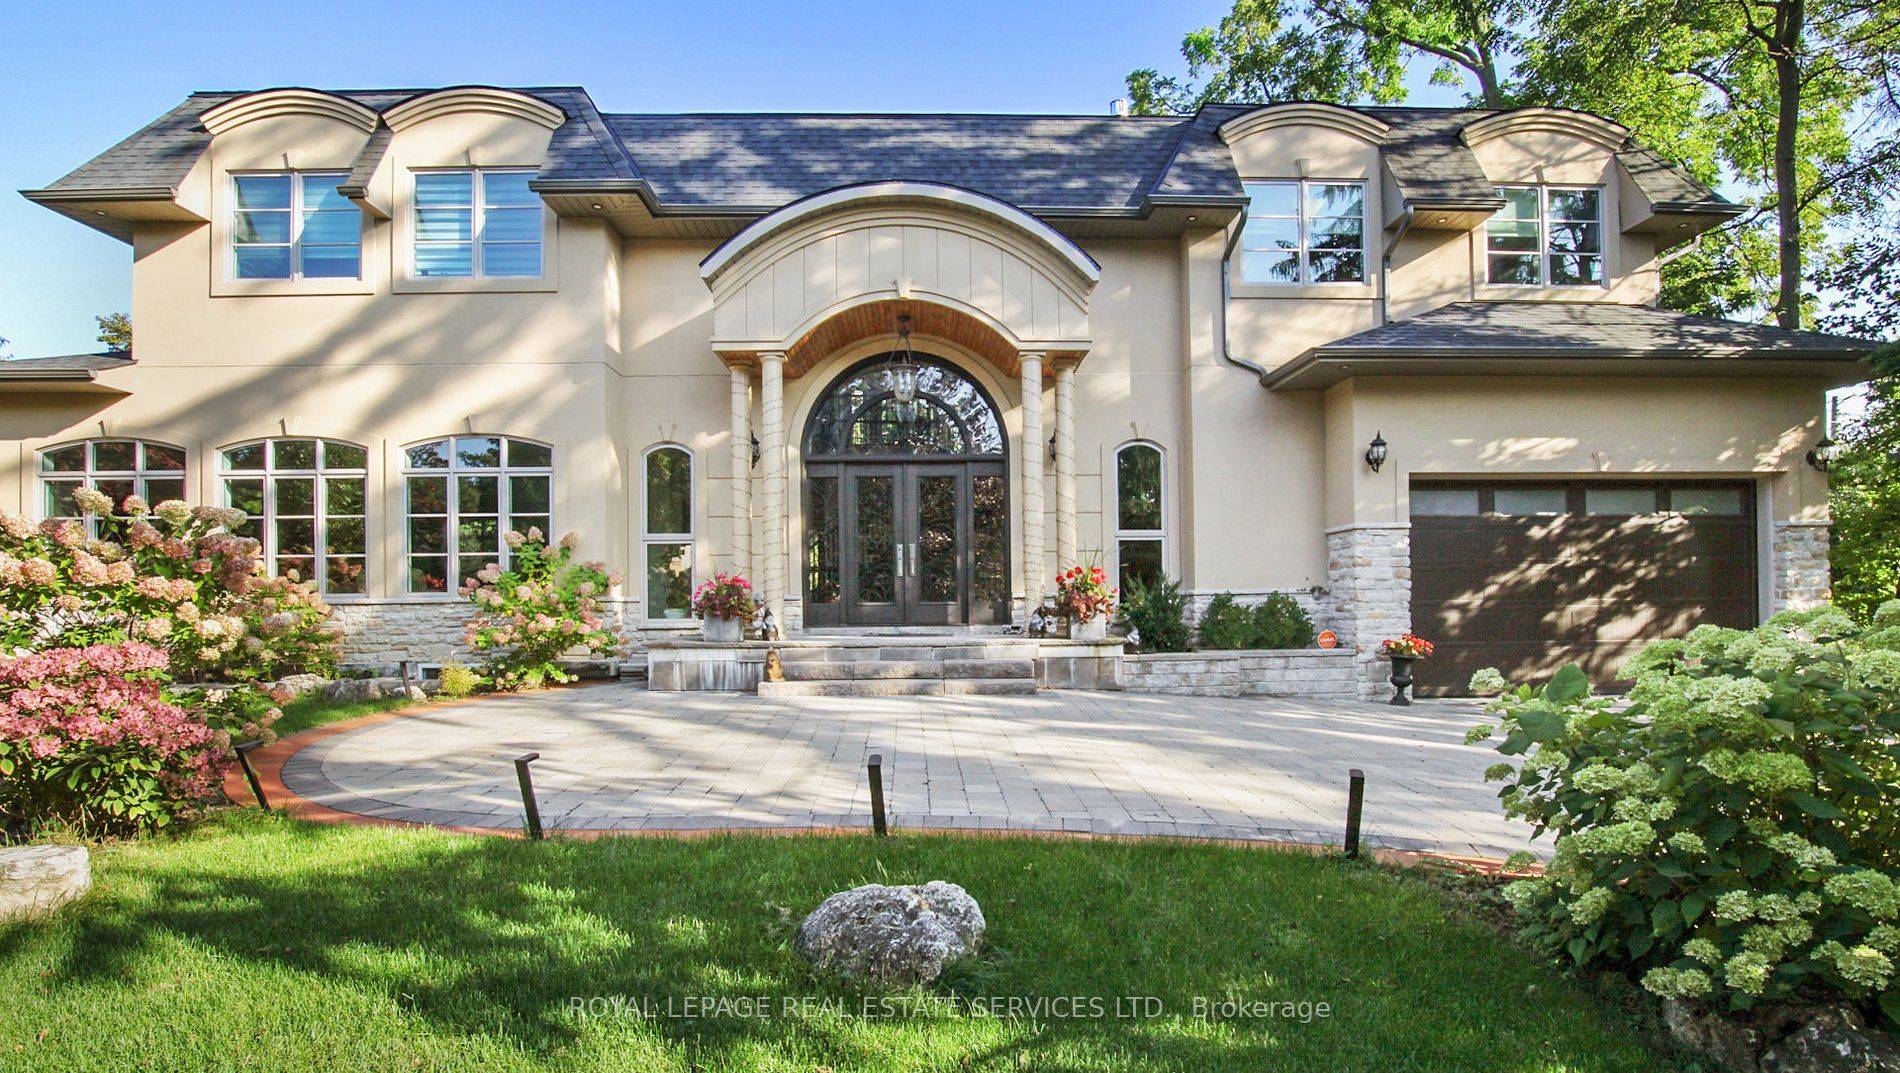 In One Of The Most Coveted Sought After Neighborhoods of South East Oakville, You Will Find The Definition Of A Contemporary Masterpiece That Offers An Astonishing Living Experience.